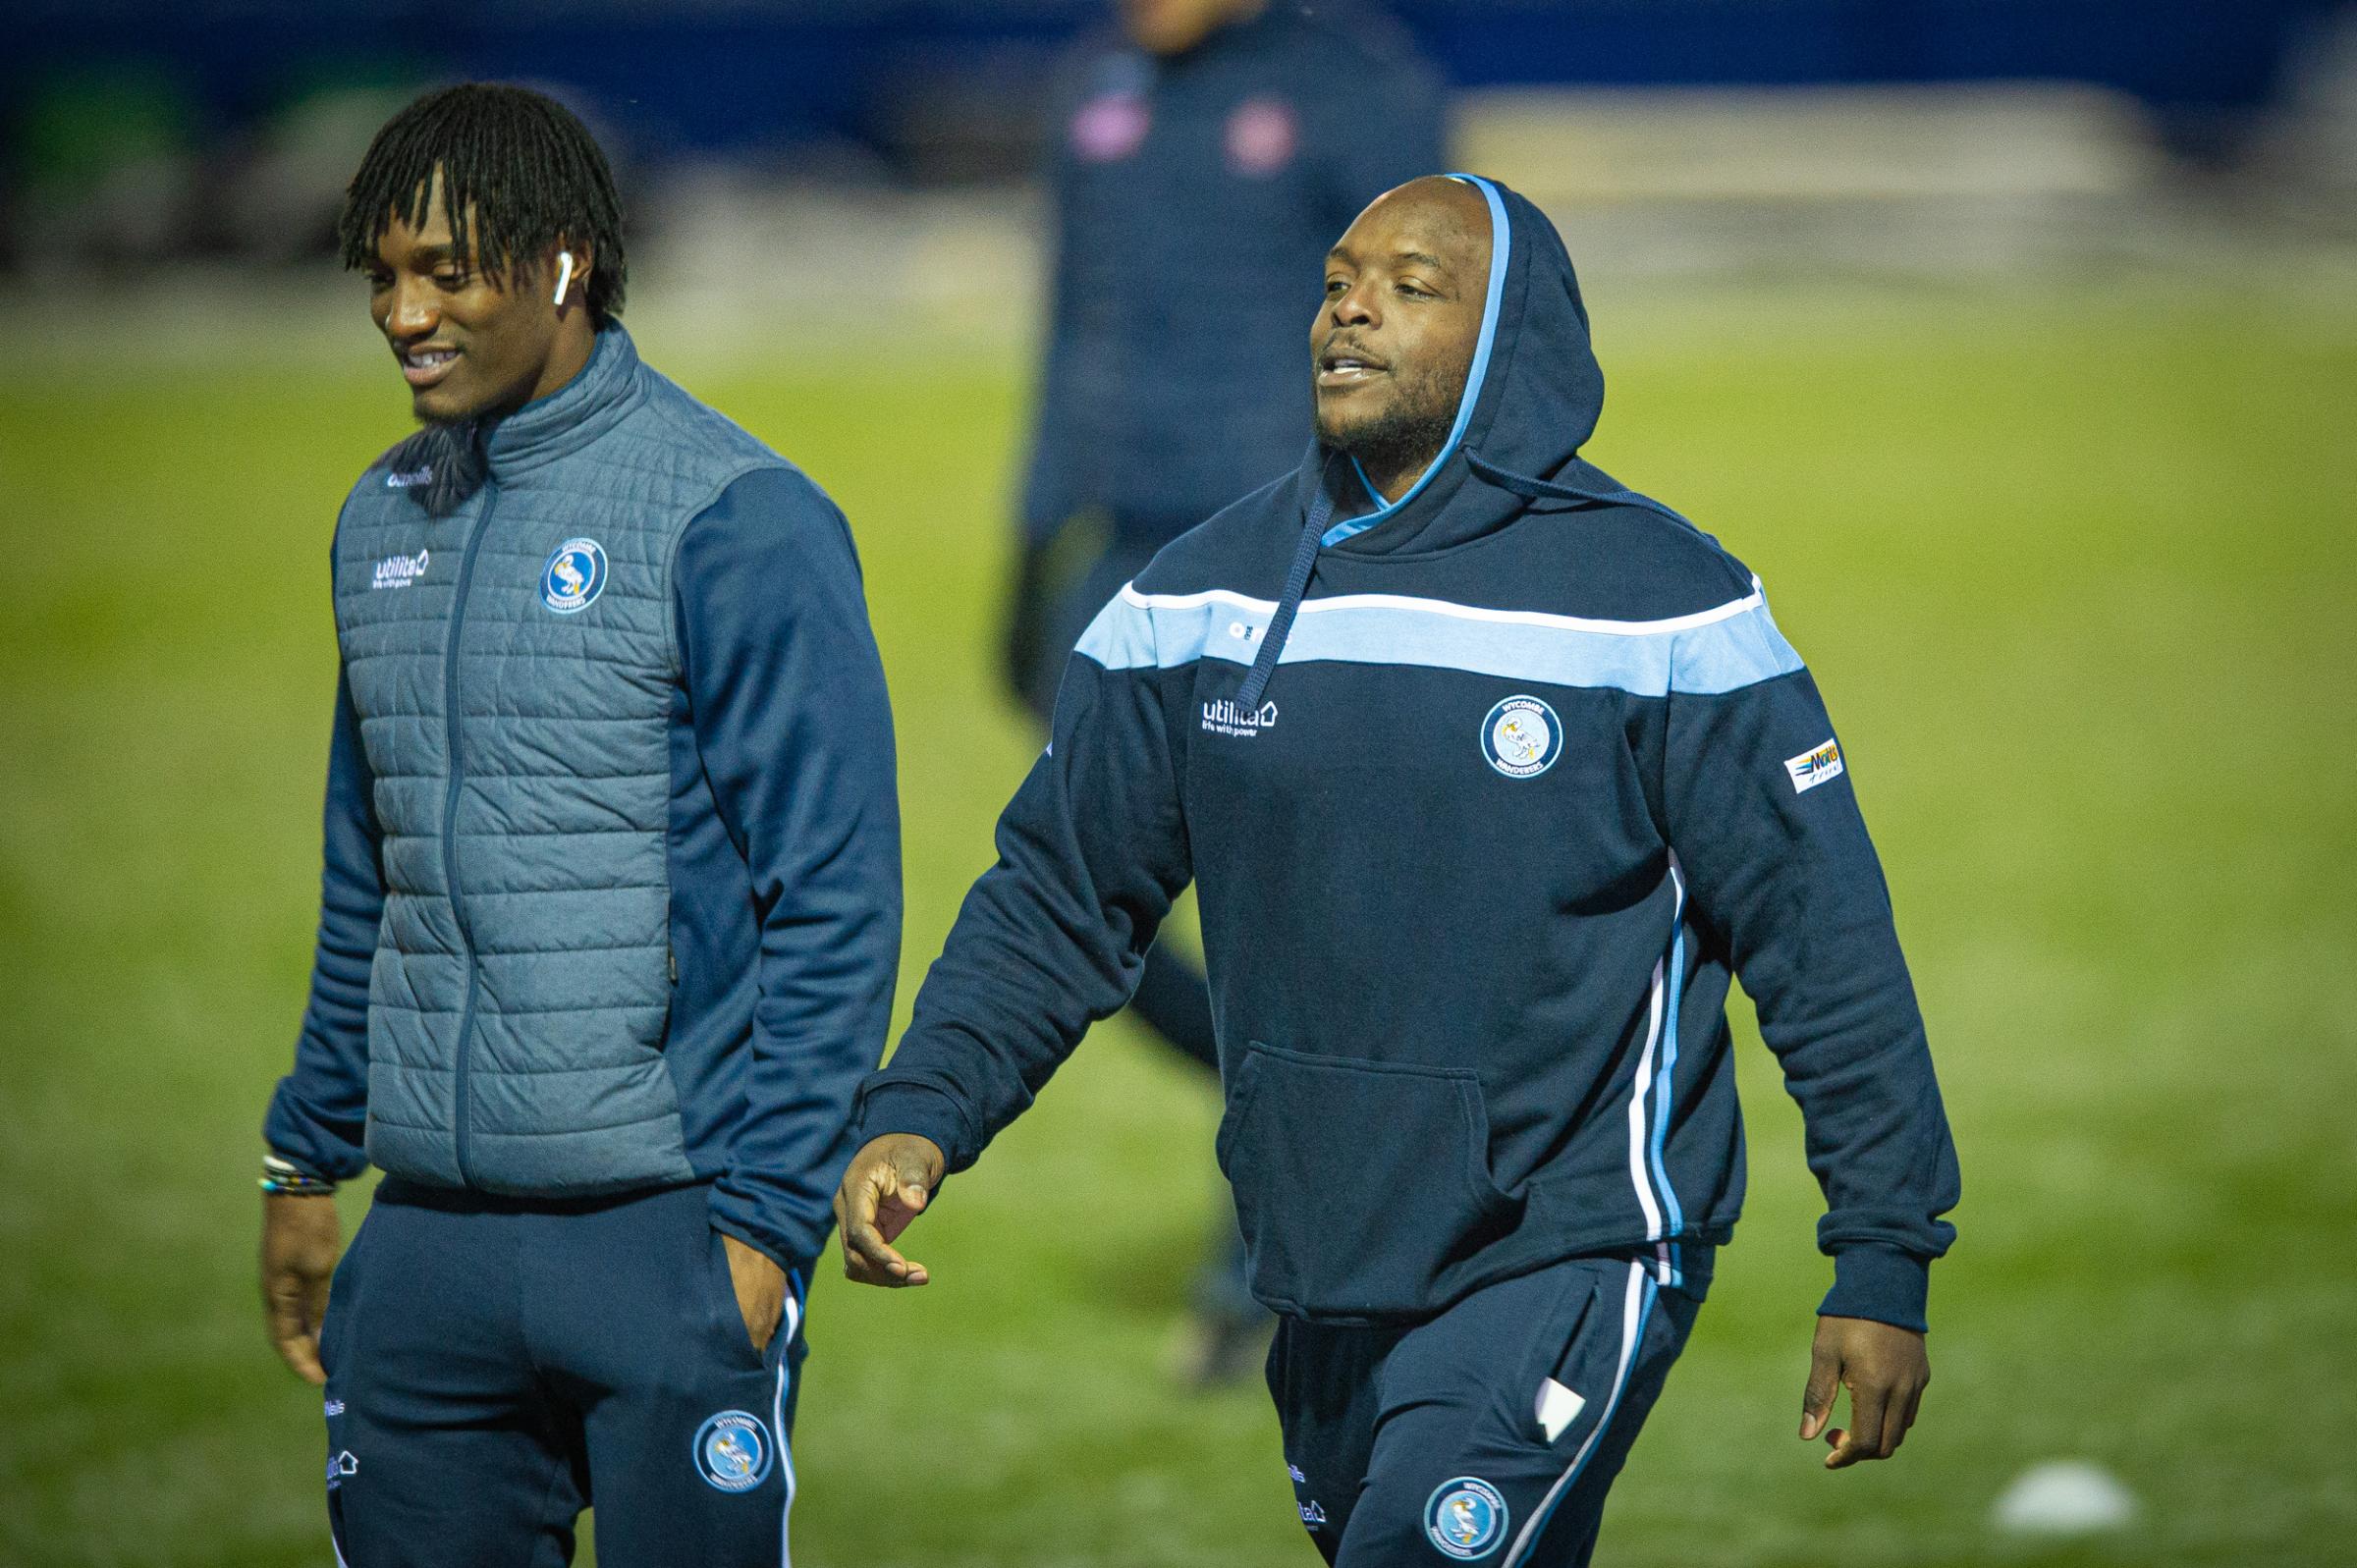 Anthony Stewart and Adebayo Akinfenwa both started matches for the first time since December (Prime Media)